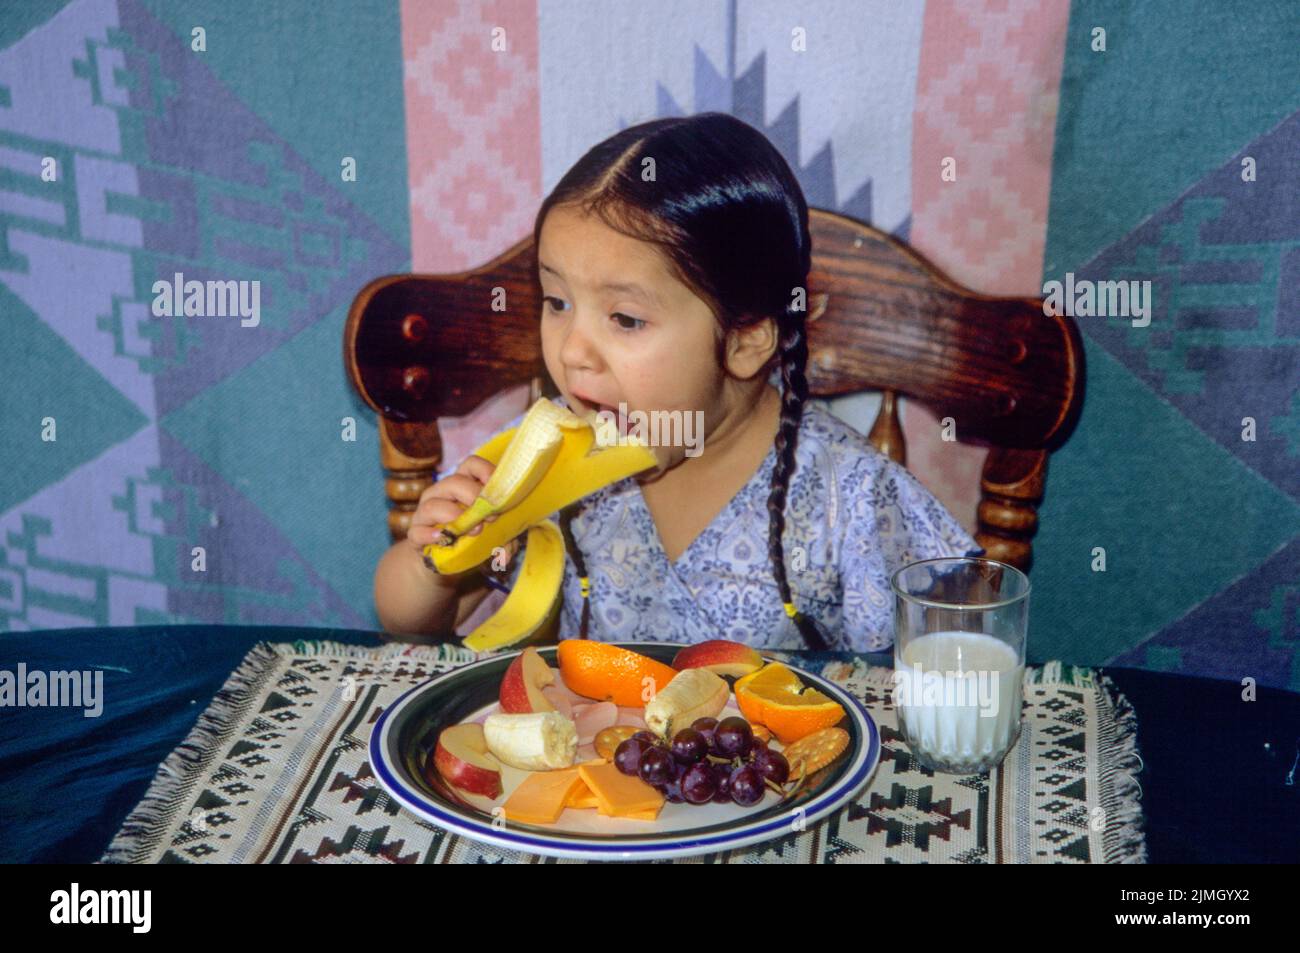 of fruit, cheese and milk while sitting in a chair at a table. Fort Hall Idaho Stock Photo